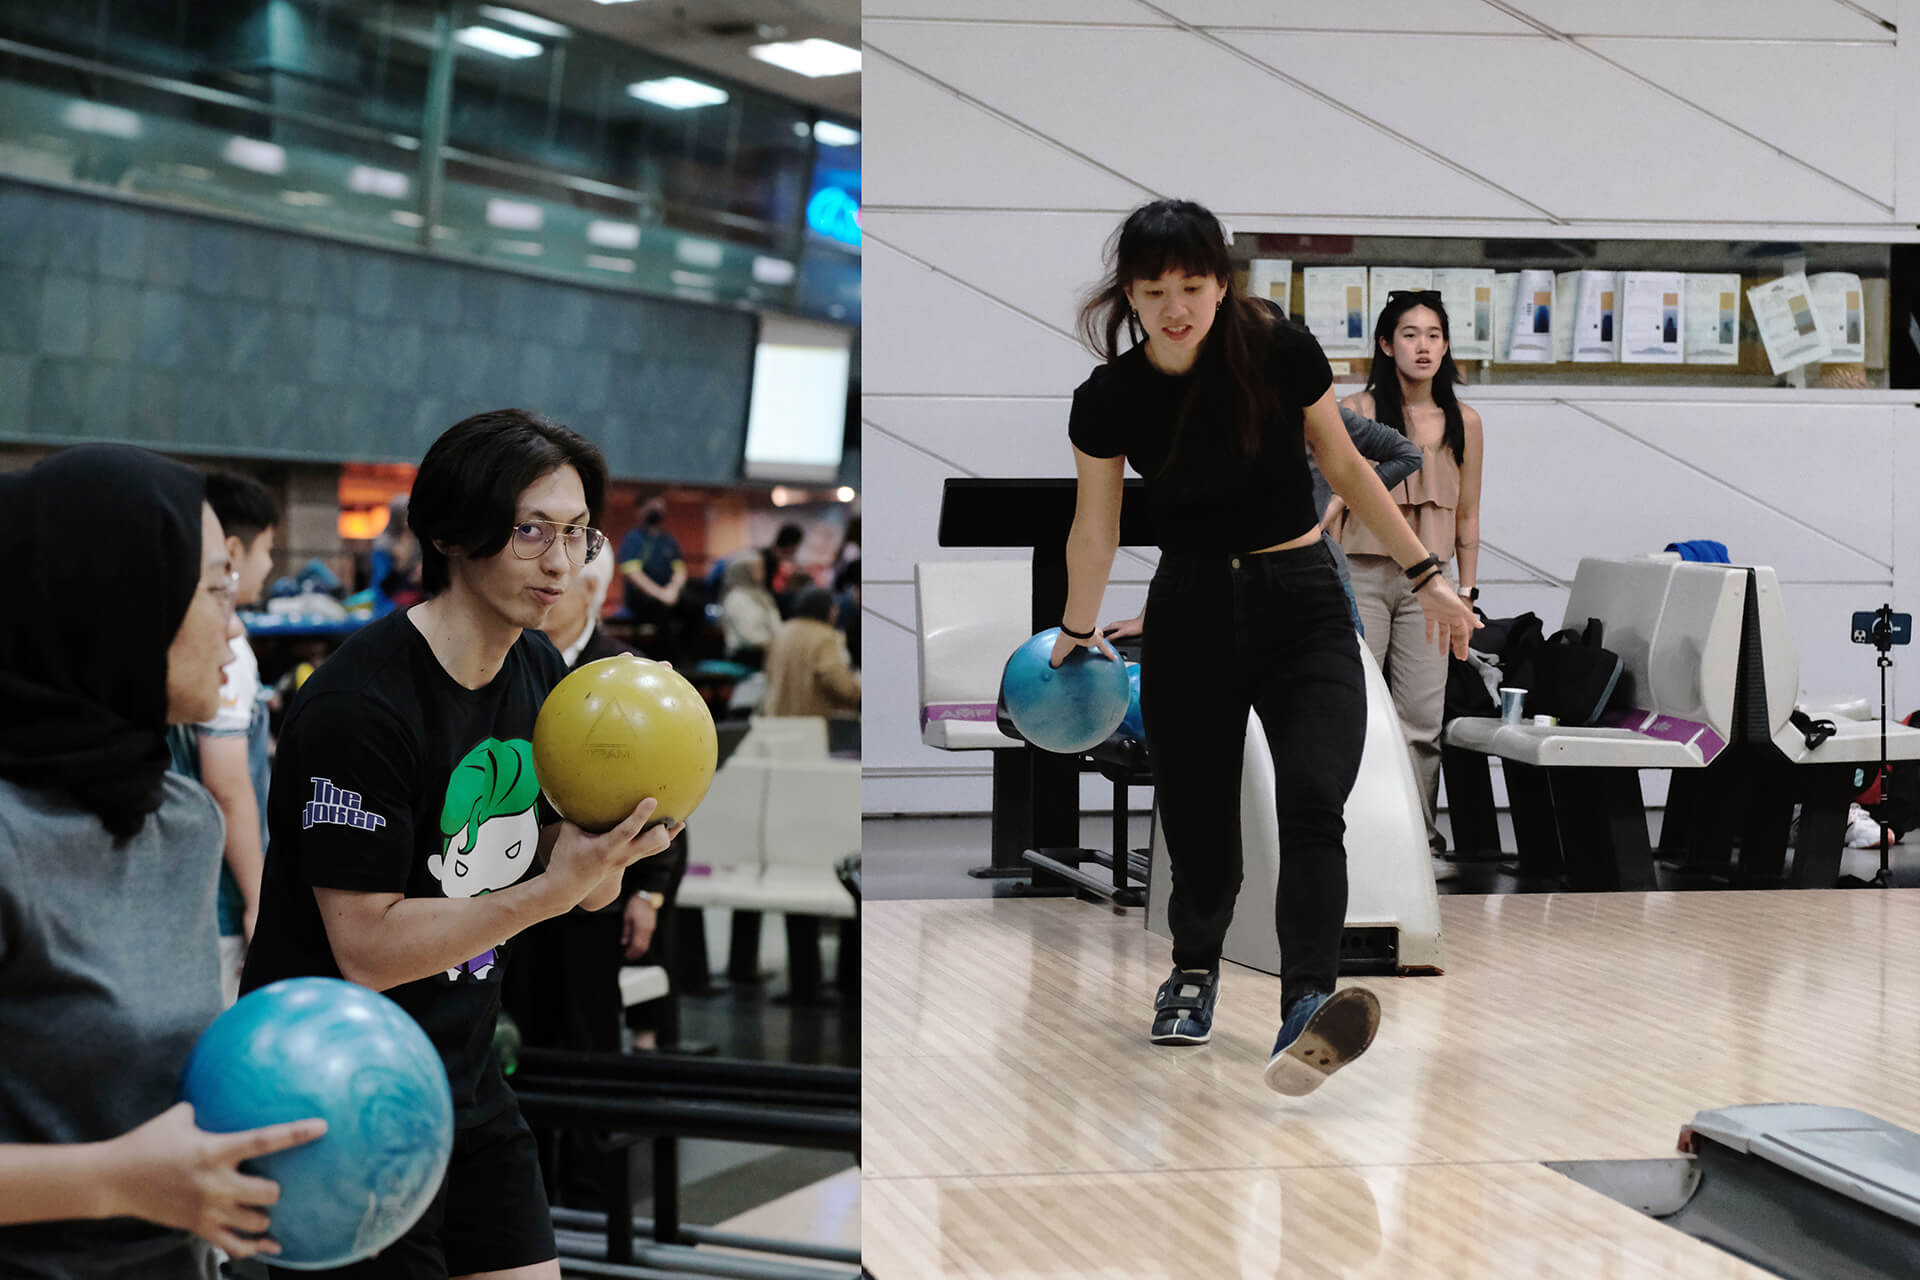 Put a bet on who’s getting the most strikes! at Sunway Mega Lanes